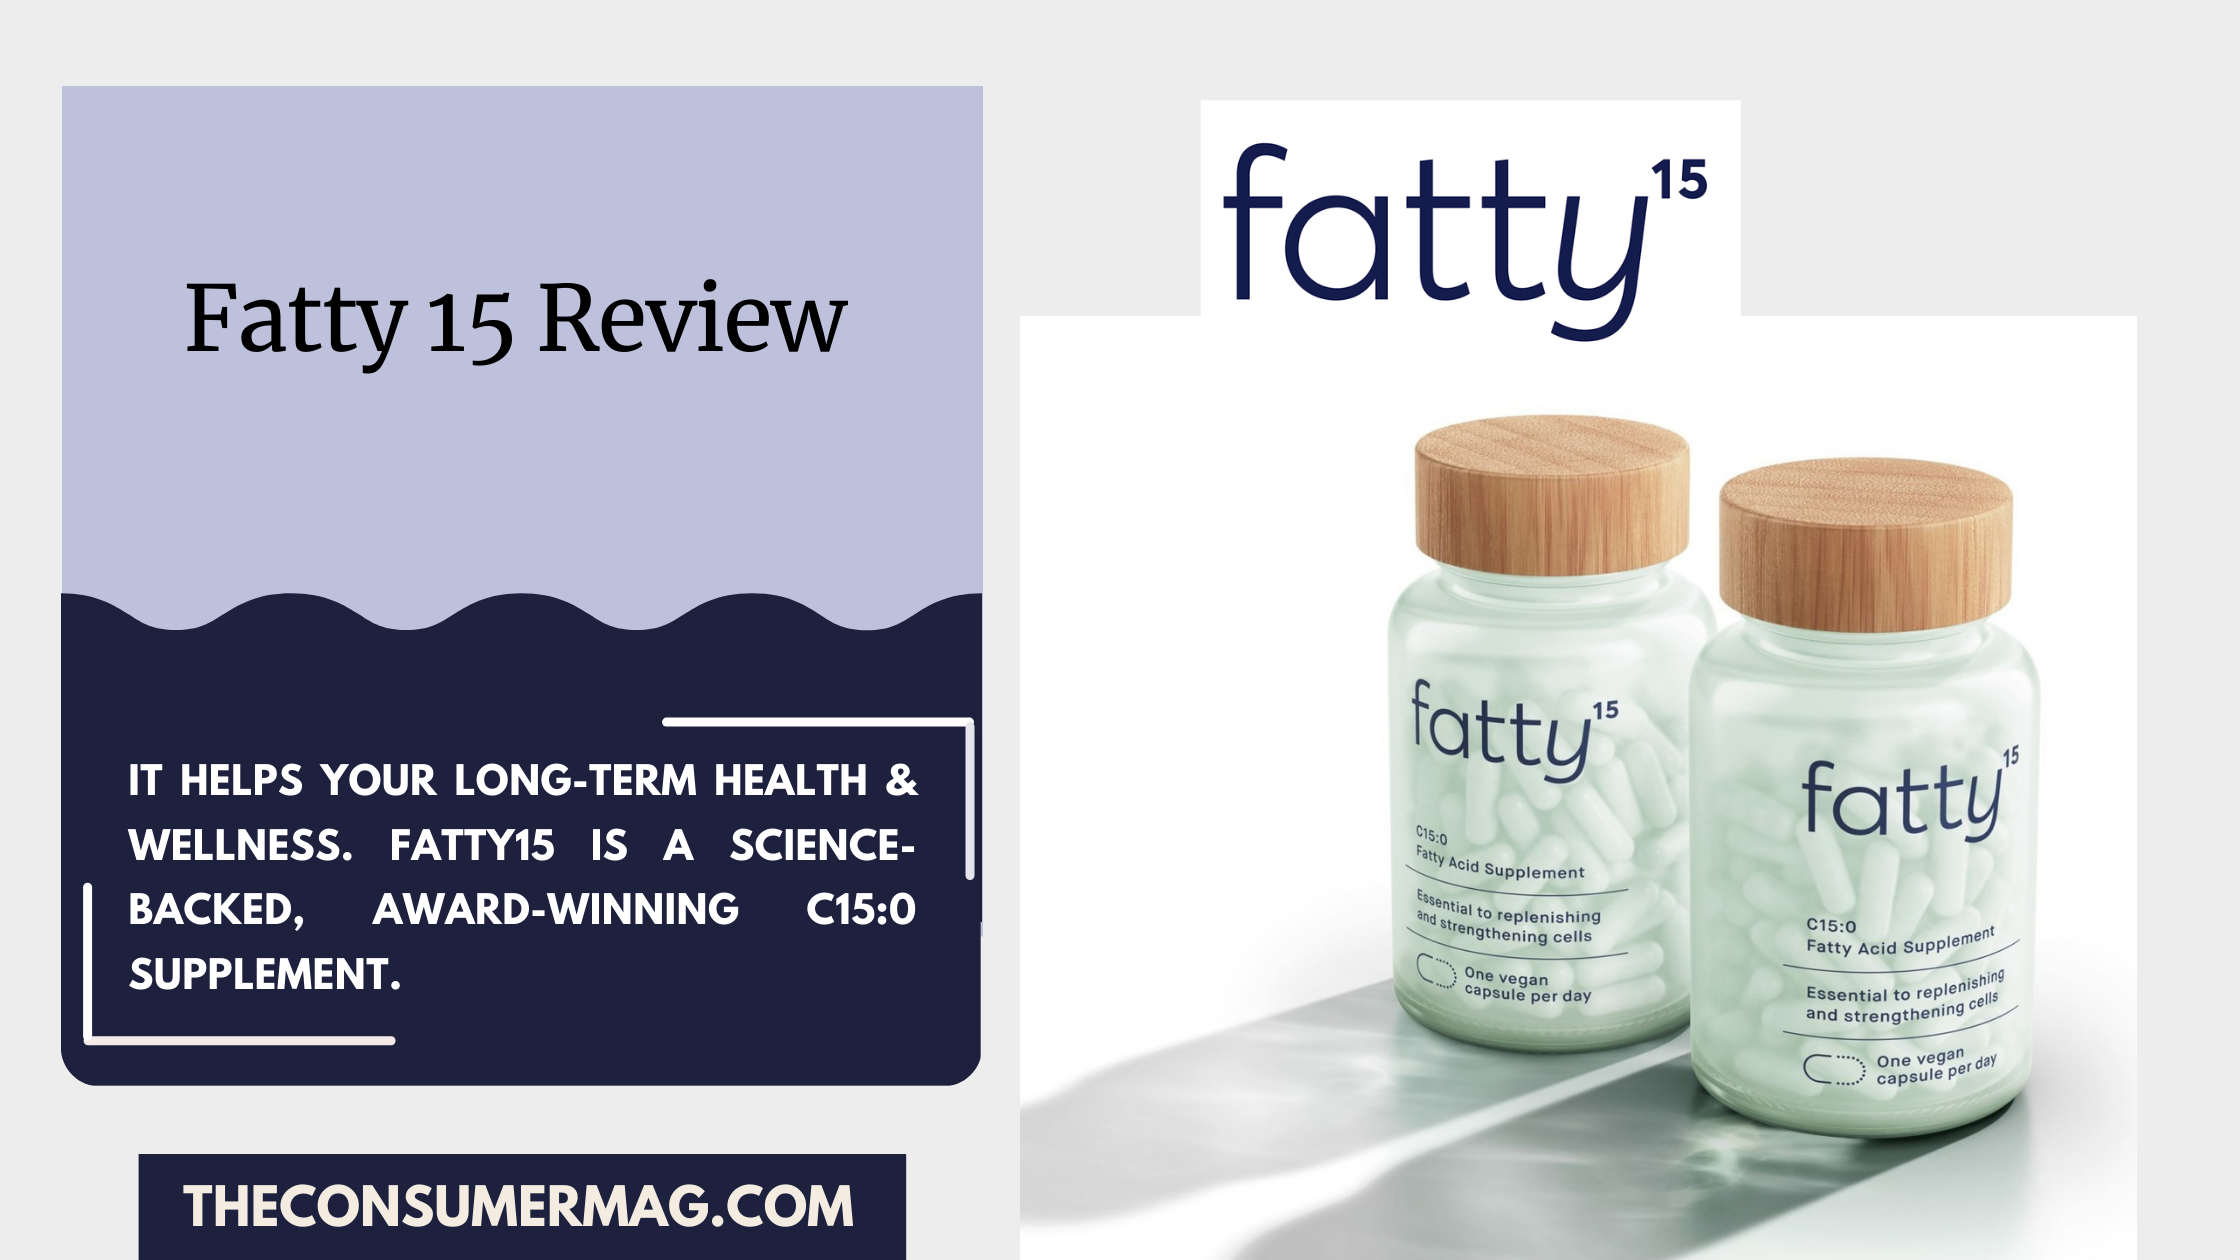 Fatty15 featured image